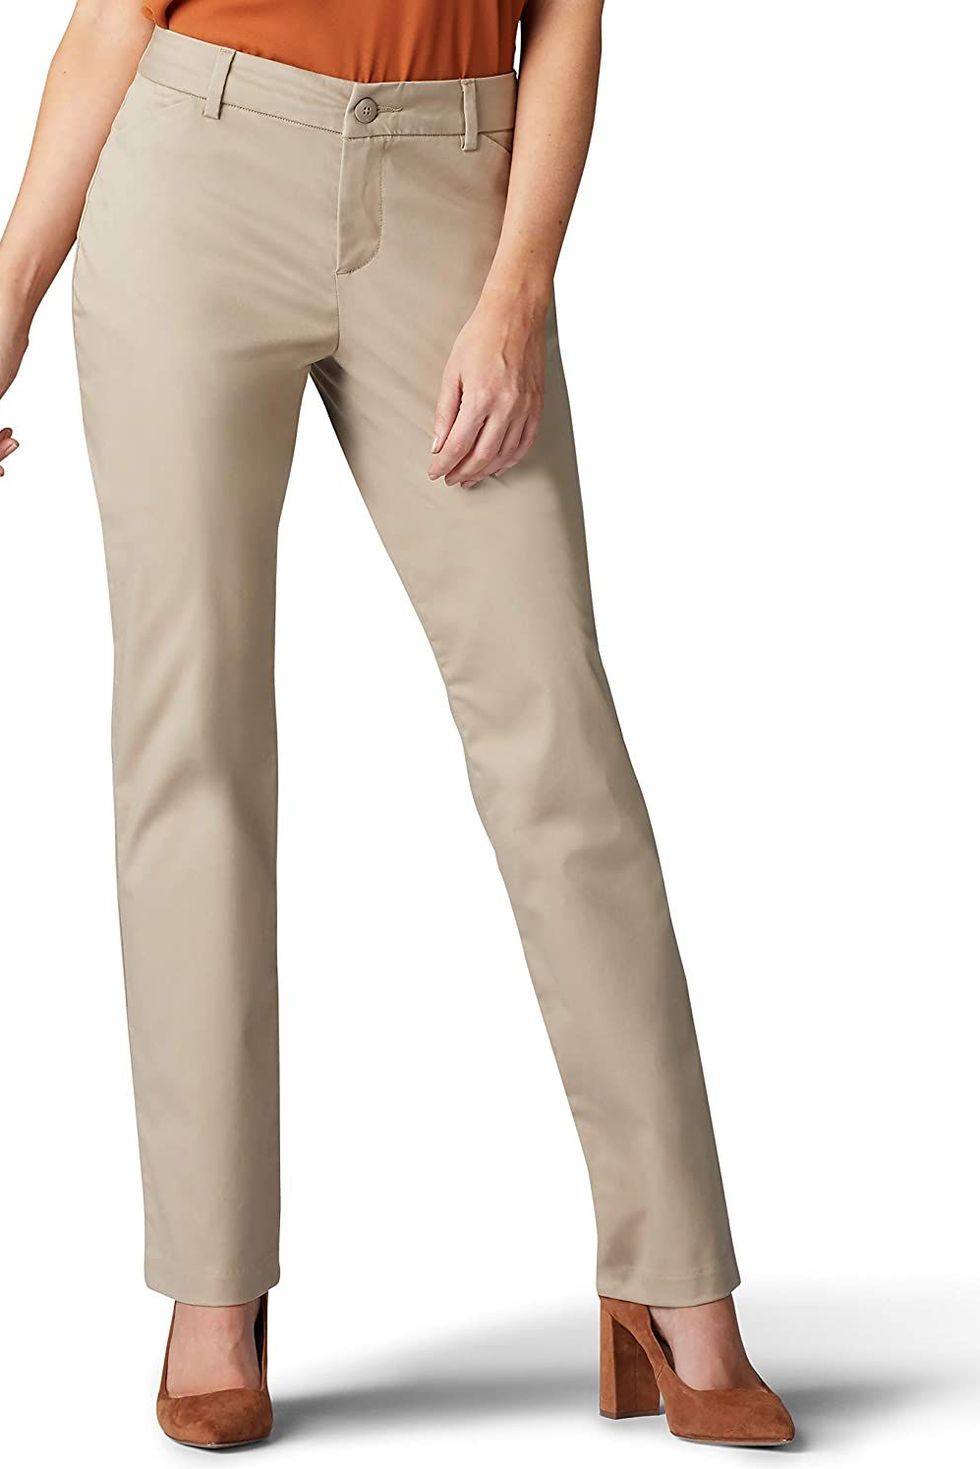 Women's Business Casual Work Pants | Straight 30